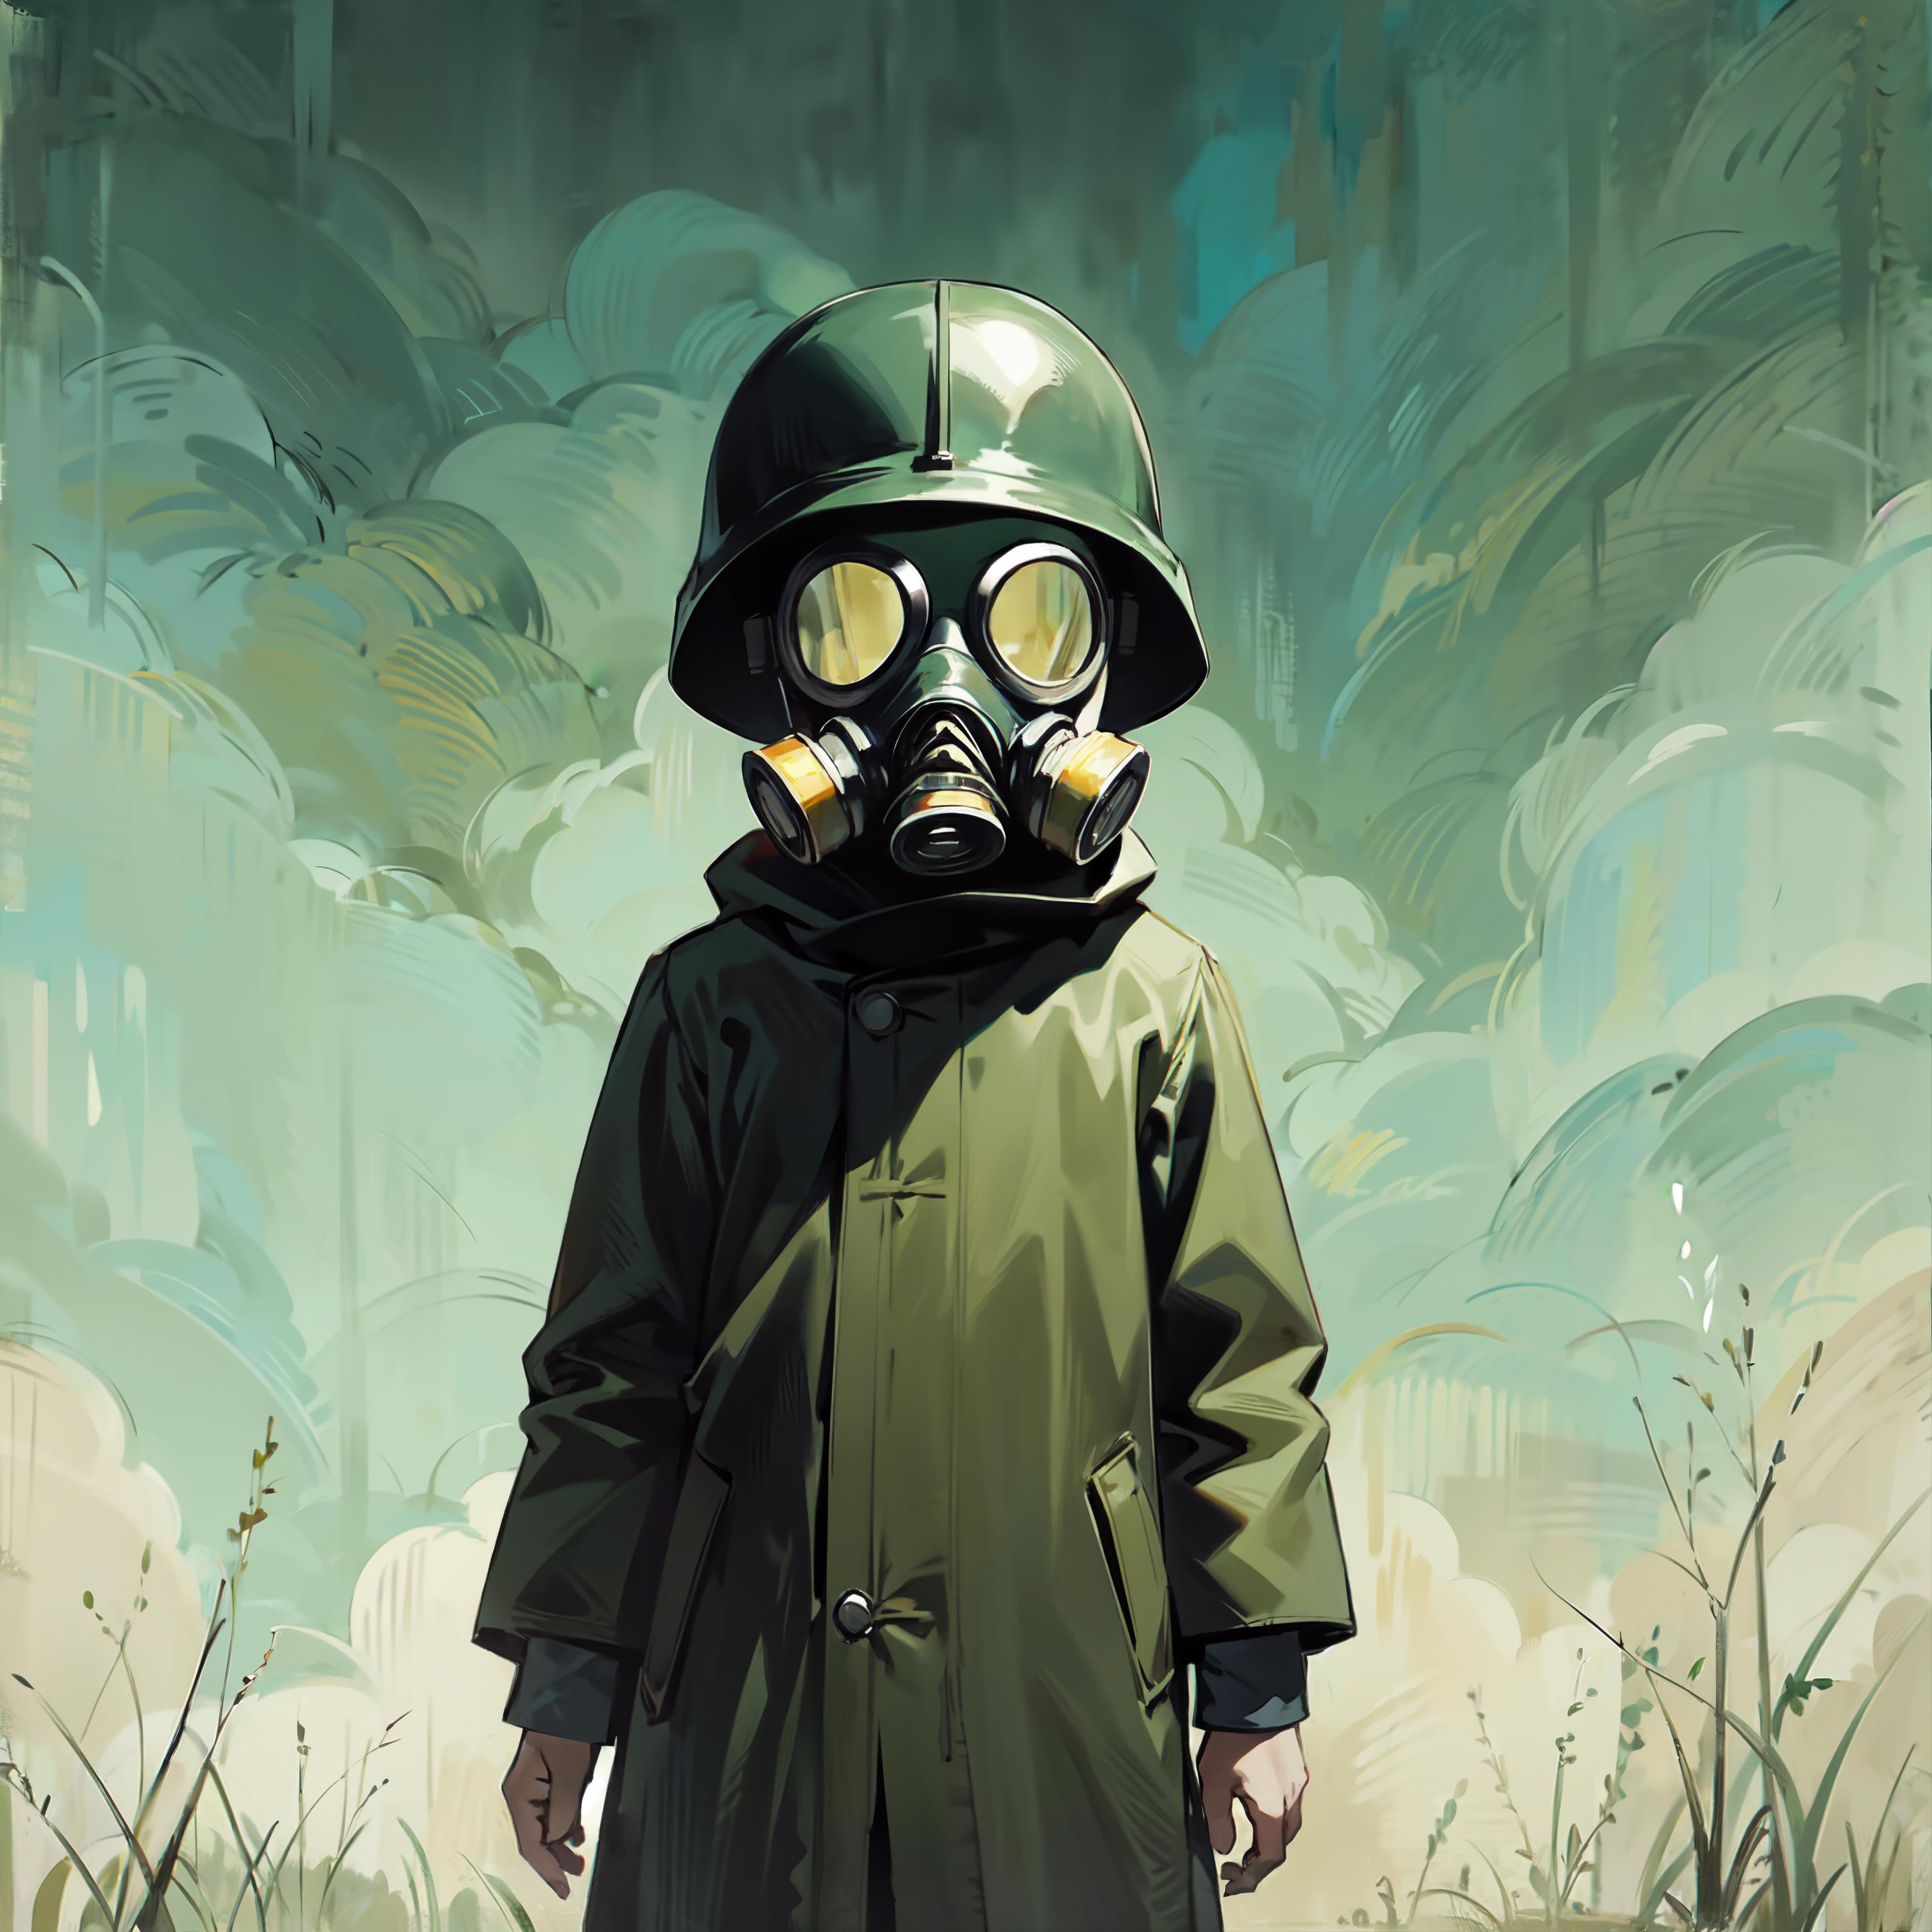 A person wearing a gas mask and a green coat standing in a field.